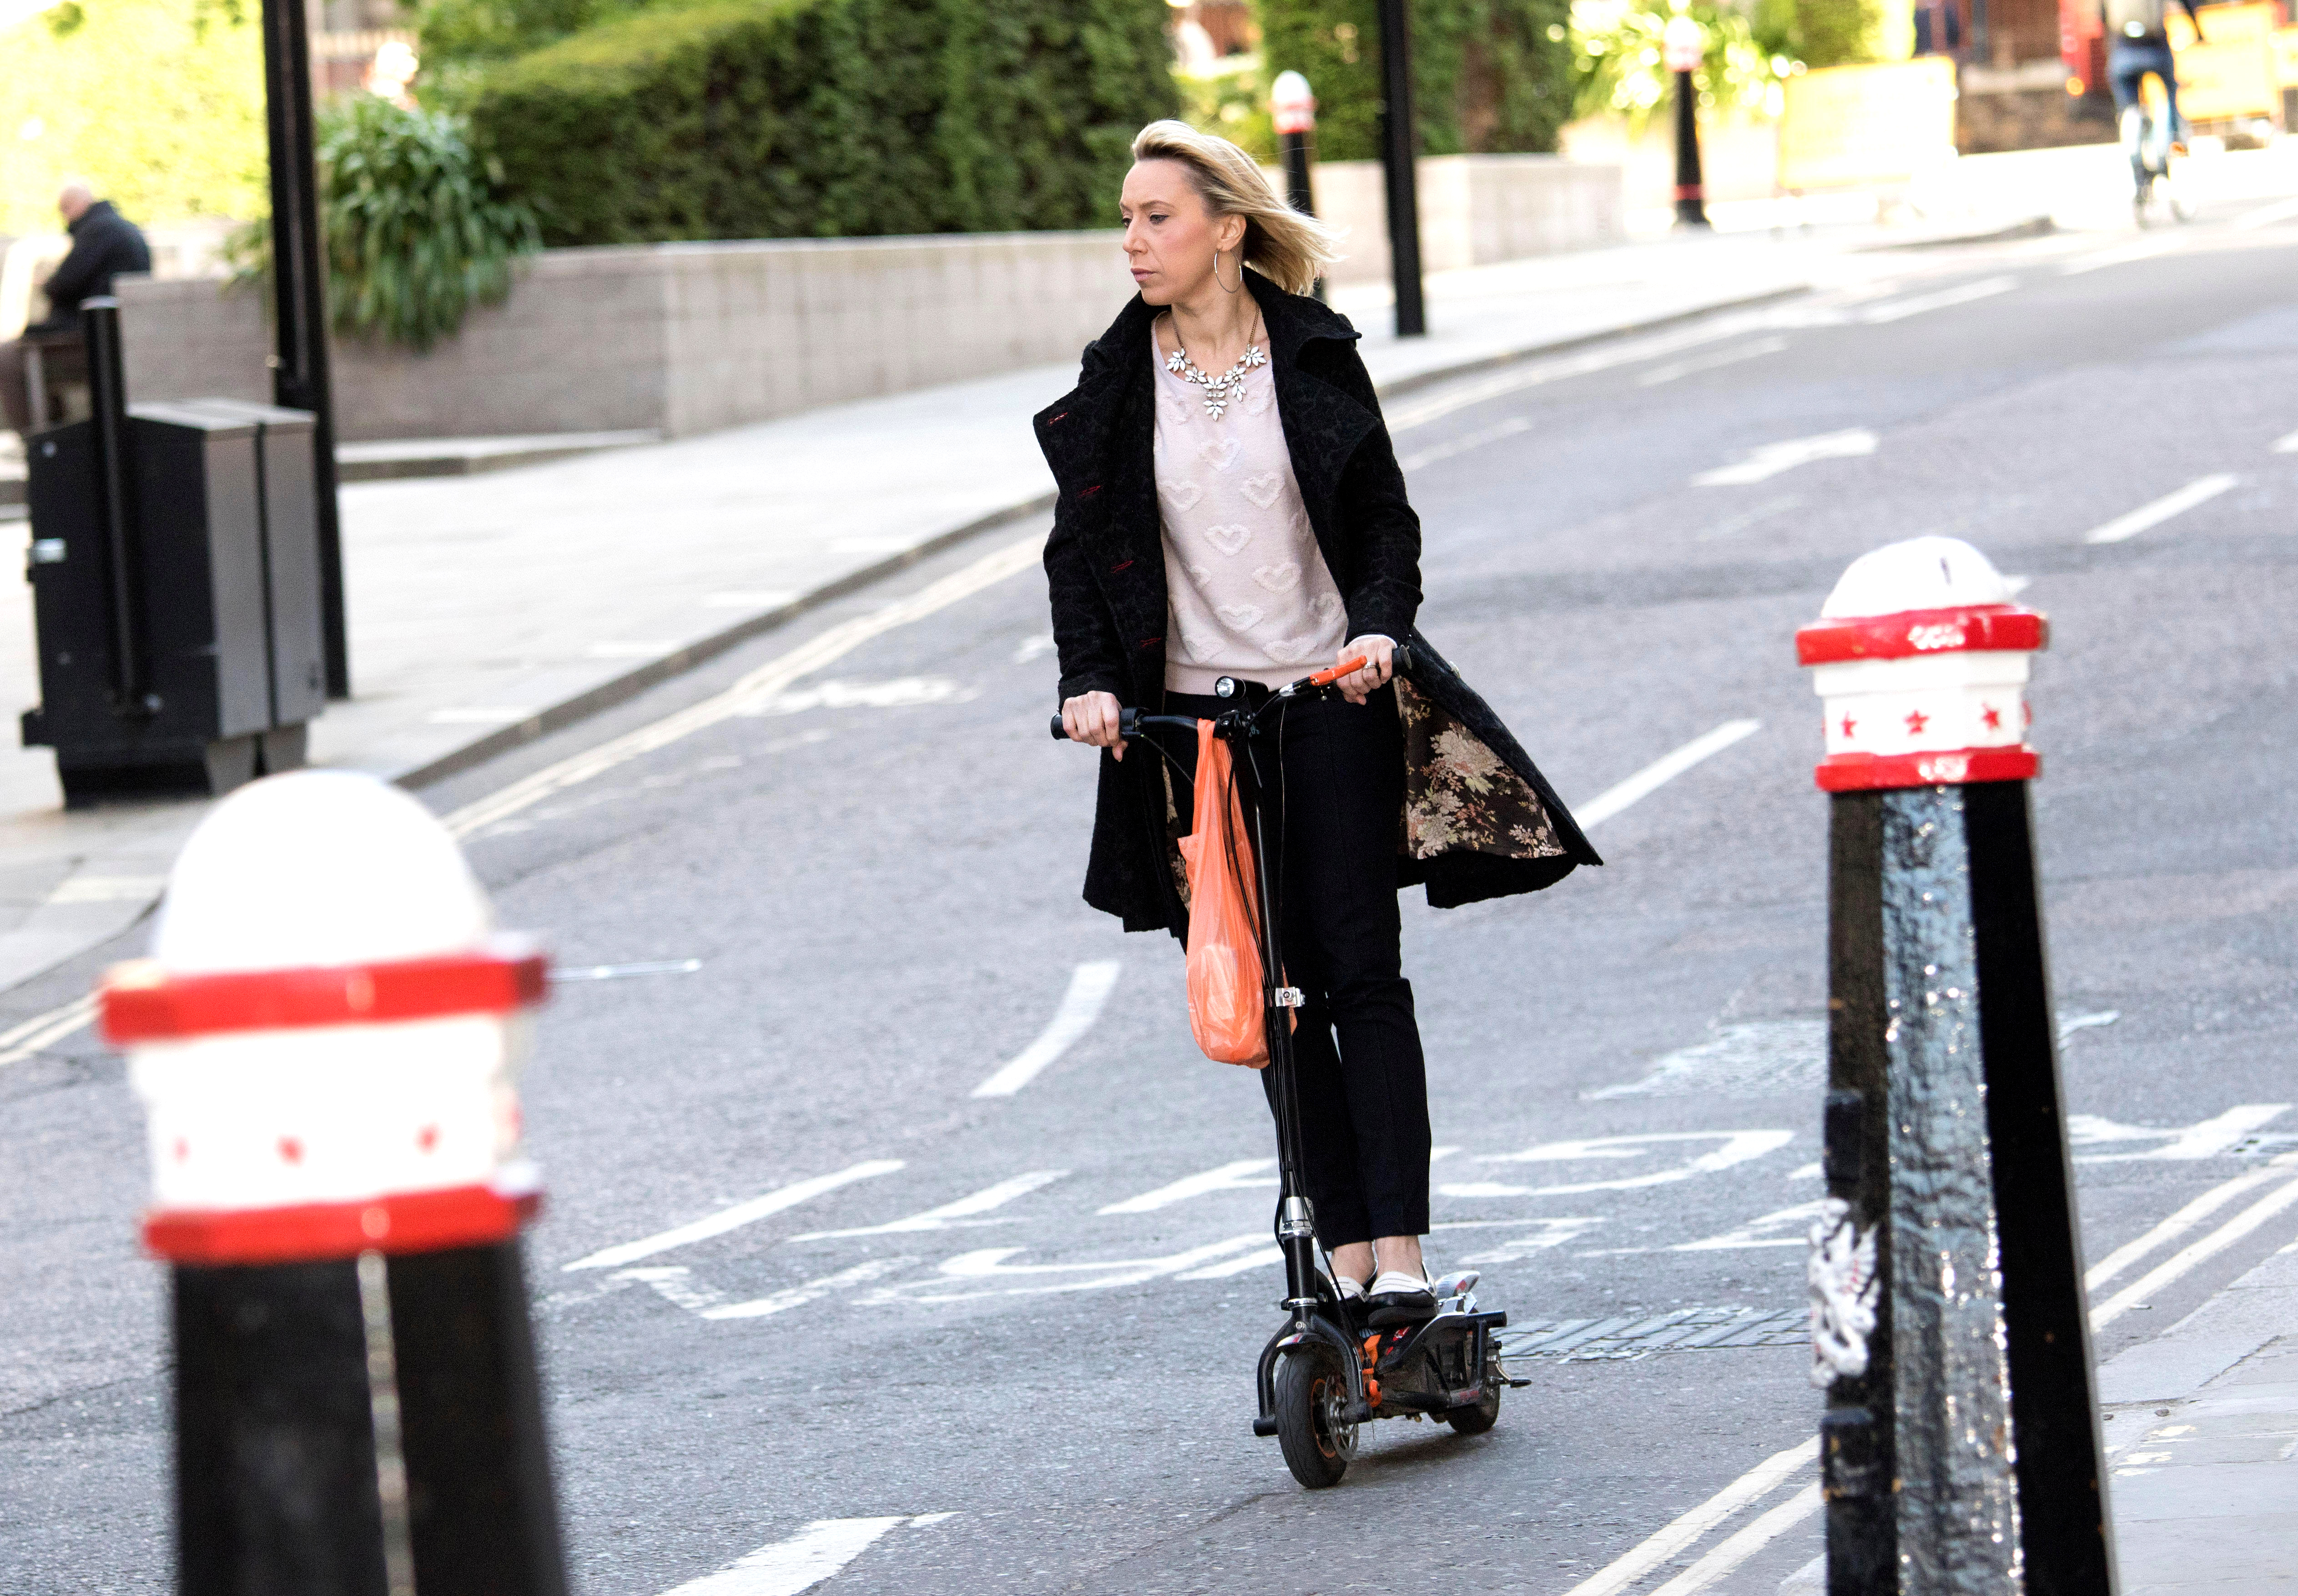 A woman riding an electric scooter.